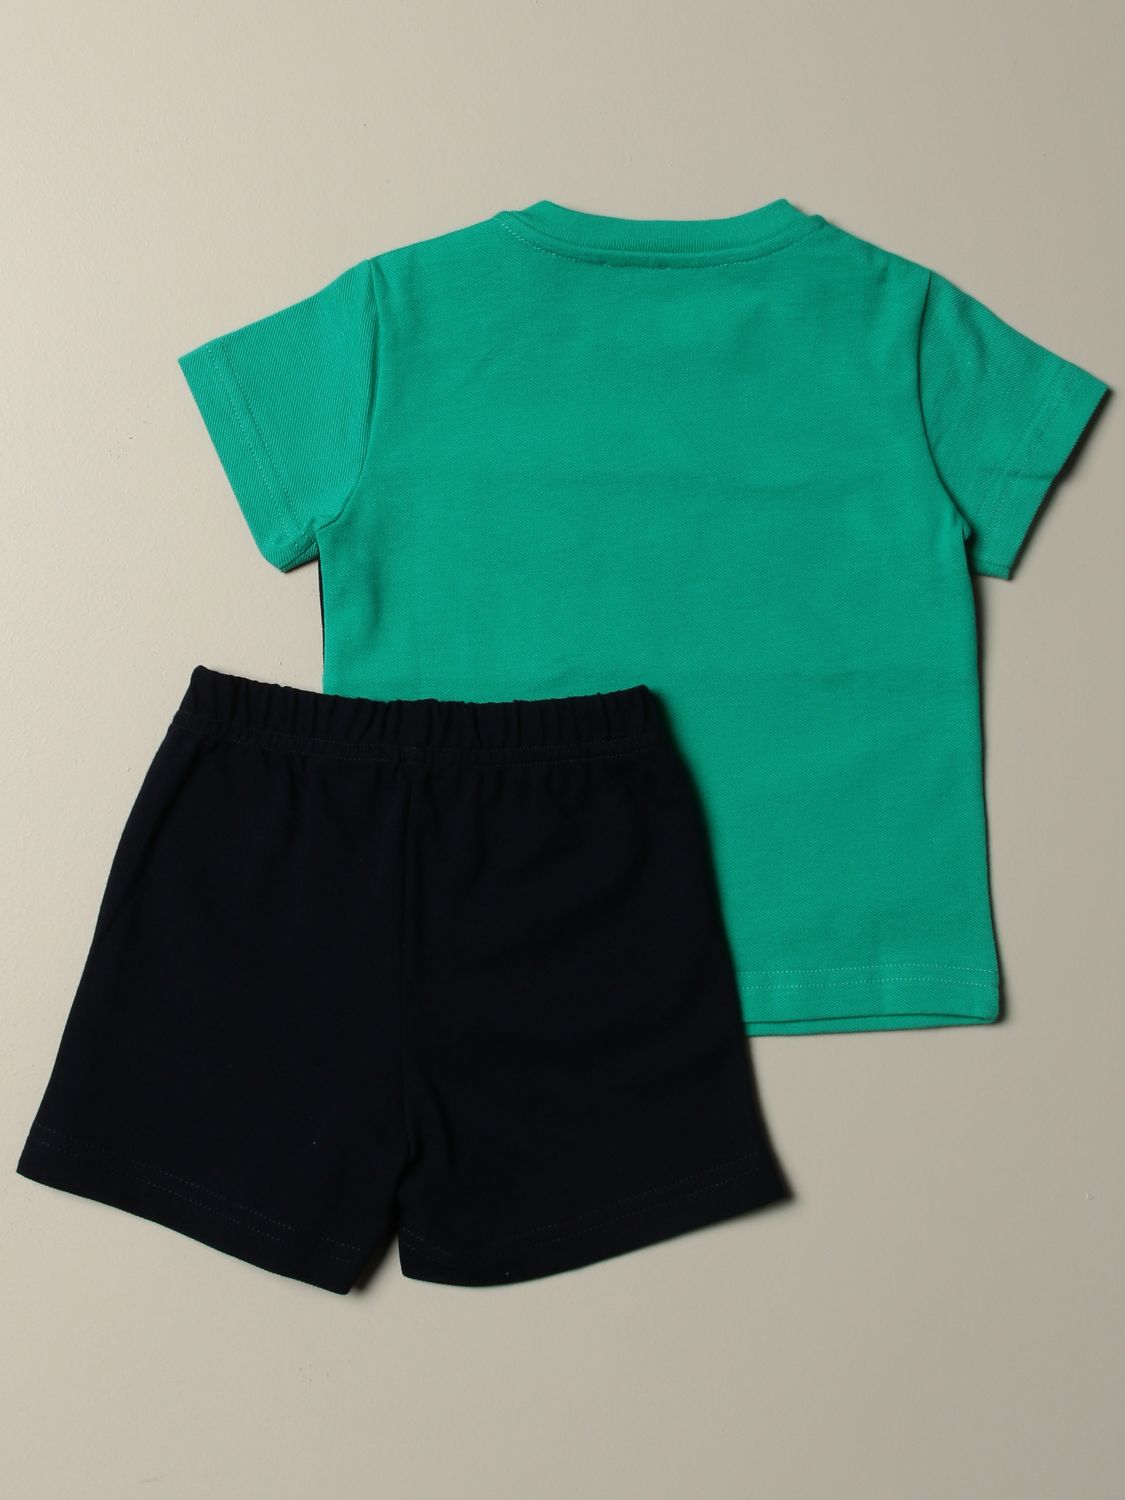 Il Gufo t-shirt + bermuda shorts set with contrasts